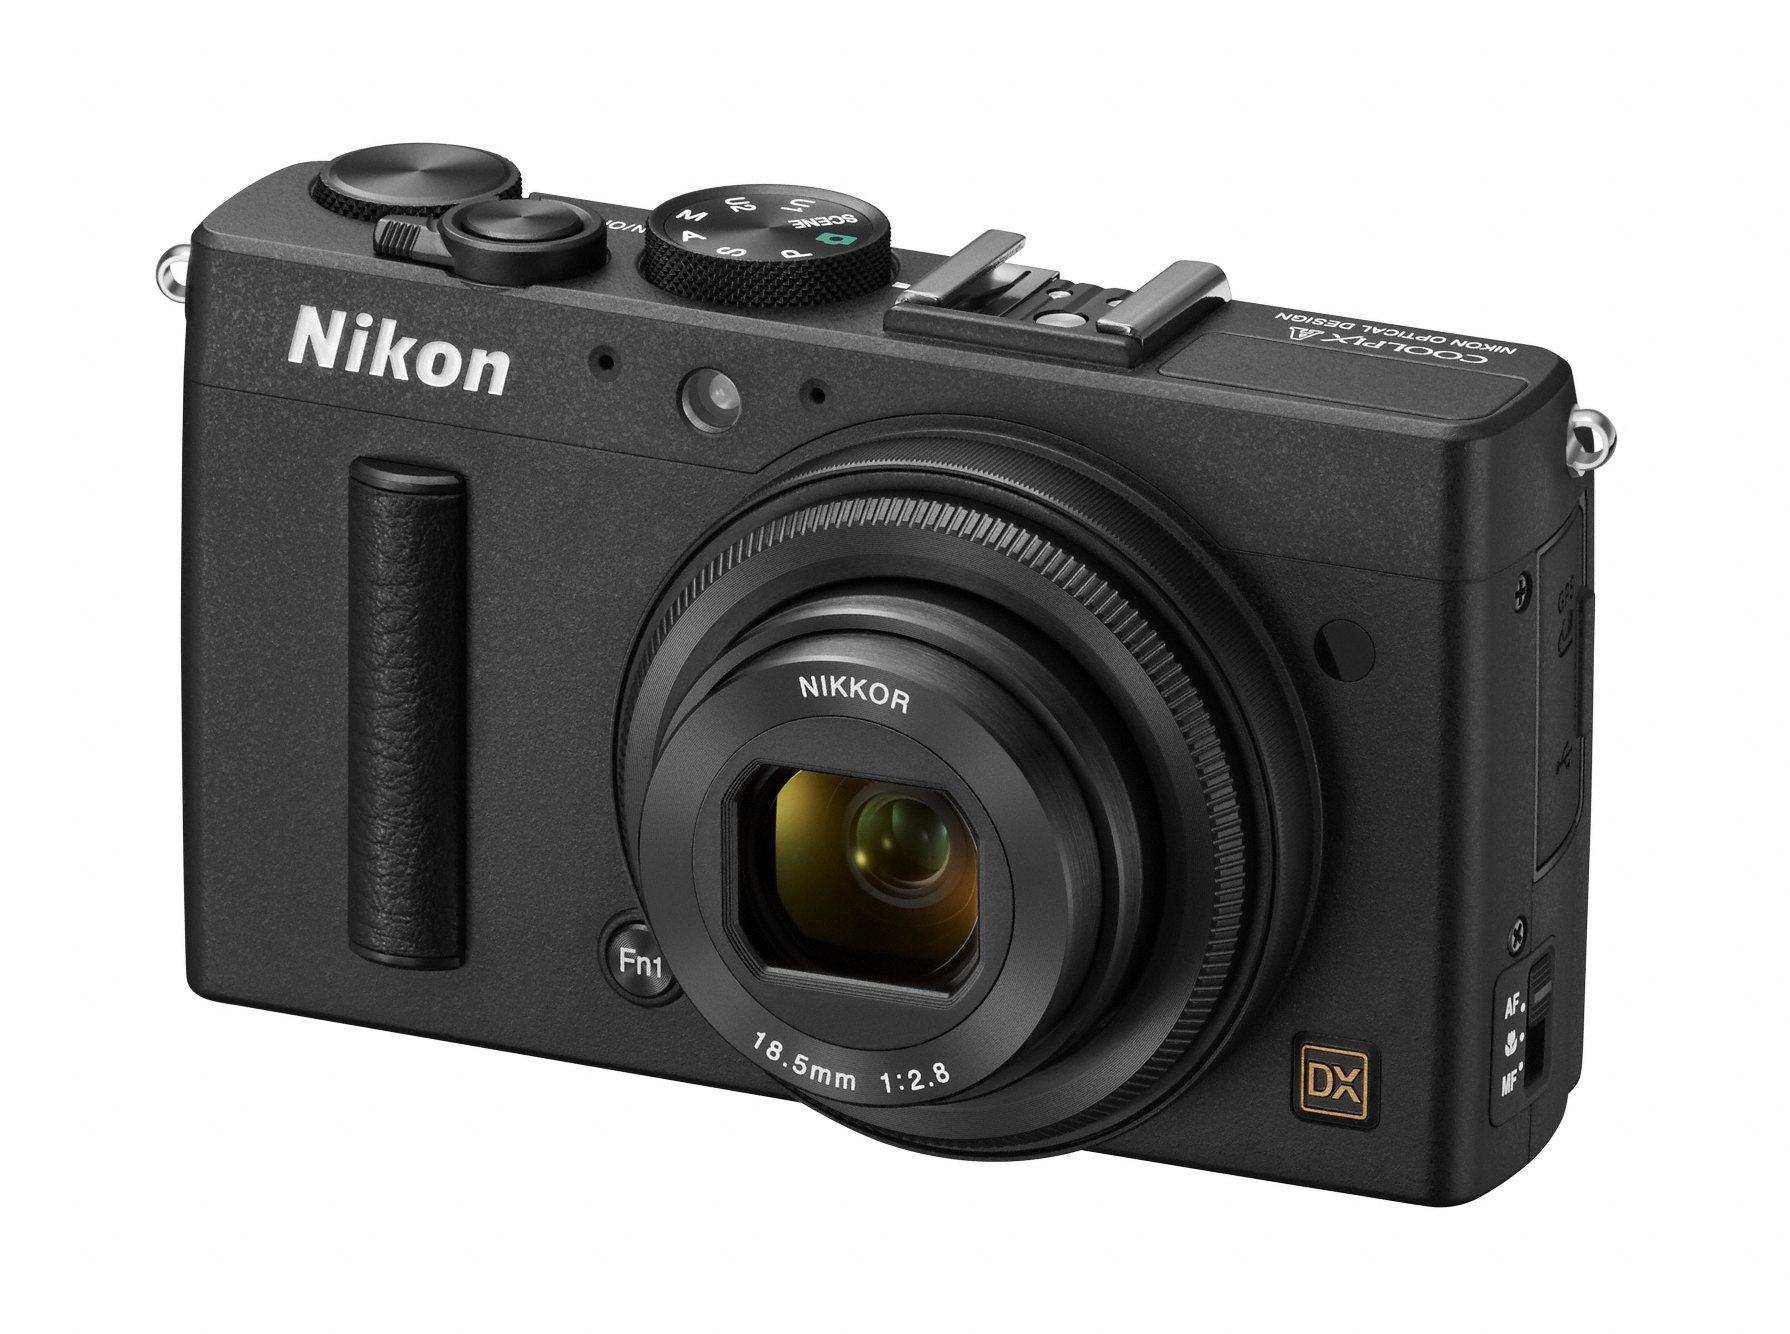 Nikon COOLPIX A 16.2 MP Digital Camera with 28mm f/2.8 Lens (Black) (Discontinued by Manufacturer)